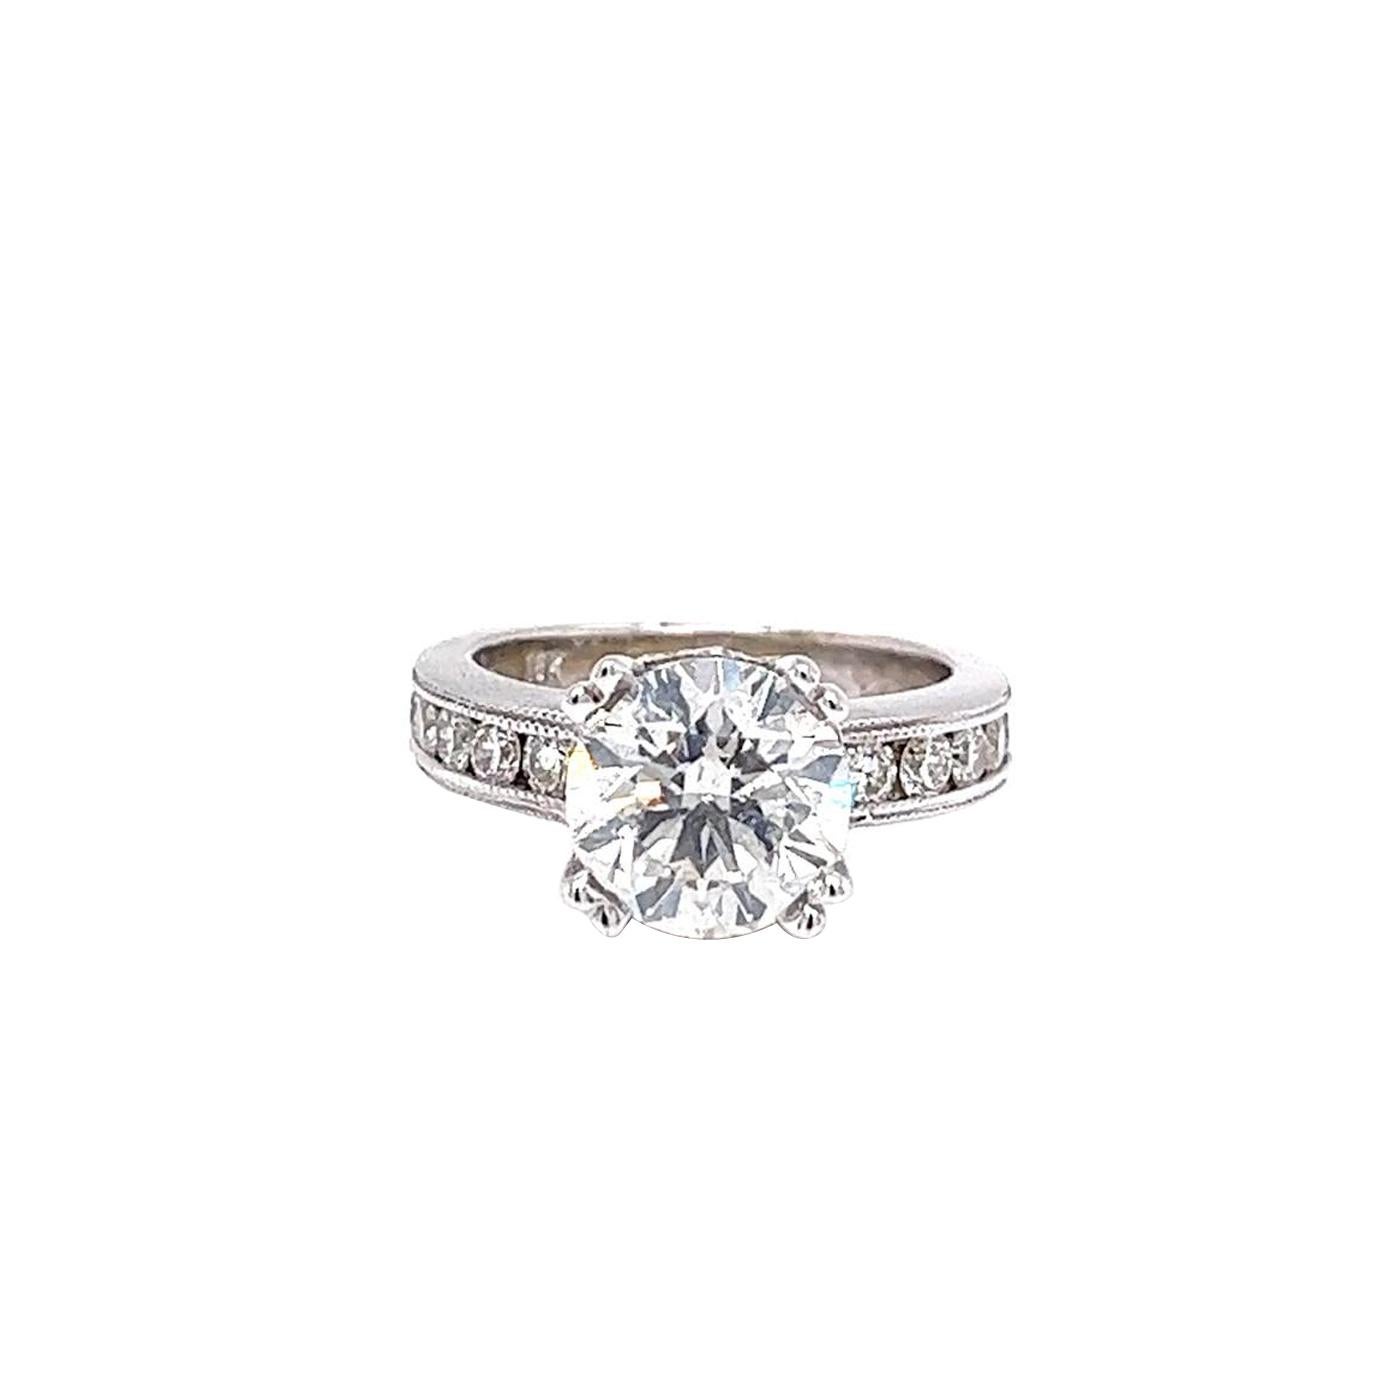 This stunning diamond engagement ring offers dazzling, bright sparkle and an elegant modern look! The ring features a 2.58-carat GIA-certified diamond with a gorgeously round brilliant cut! The beautifully exceptionally clean diamond is stunningly